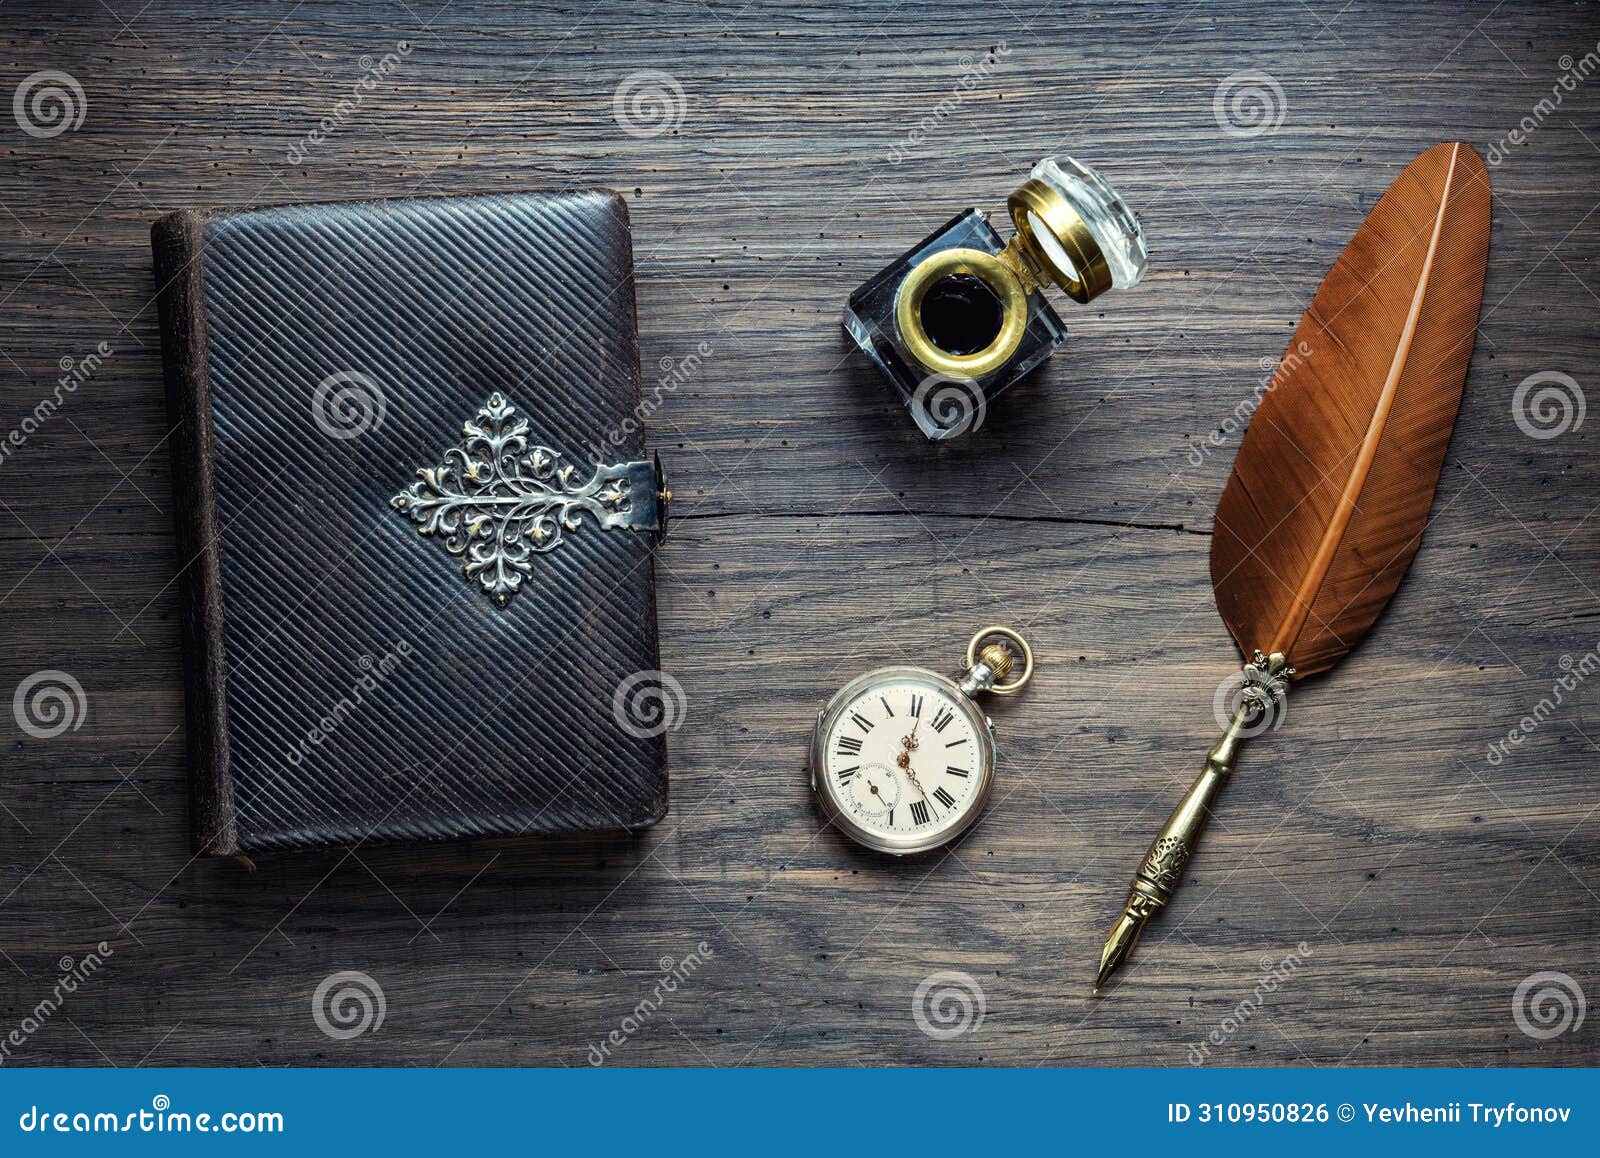 old quill pen, old book, clock and vintage inkwell on wooden desk in the old office . retro style. conceptual background on